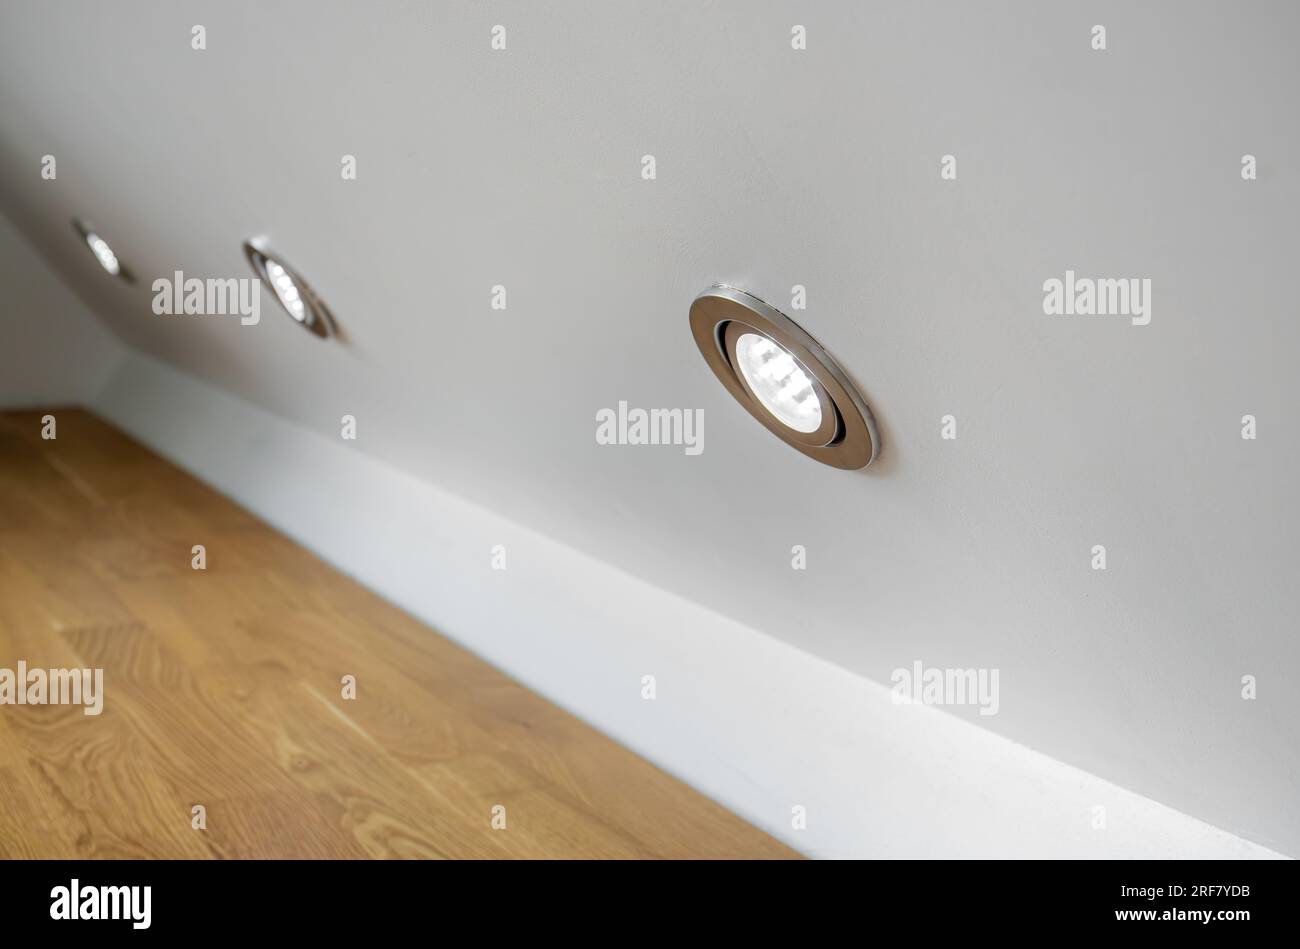 Built in small round LED down lights inside home room wall. Home decor concept. Stock Photo